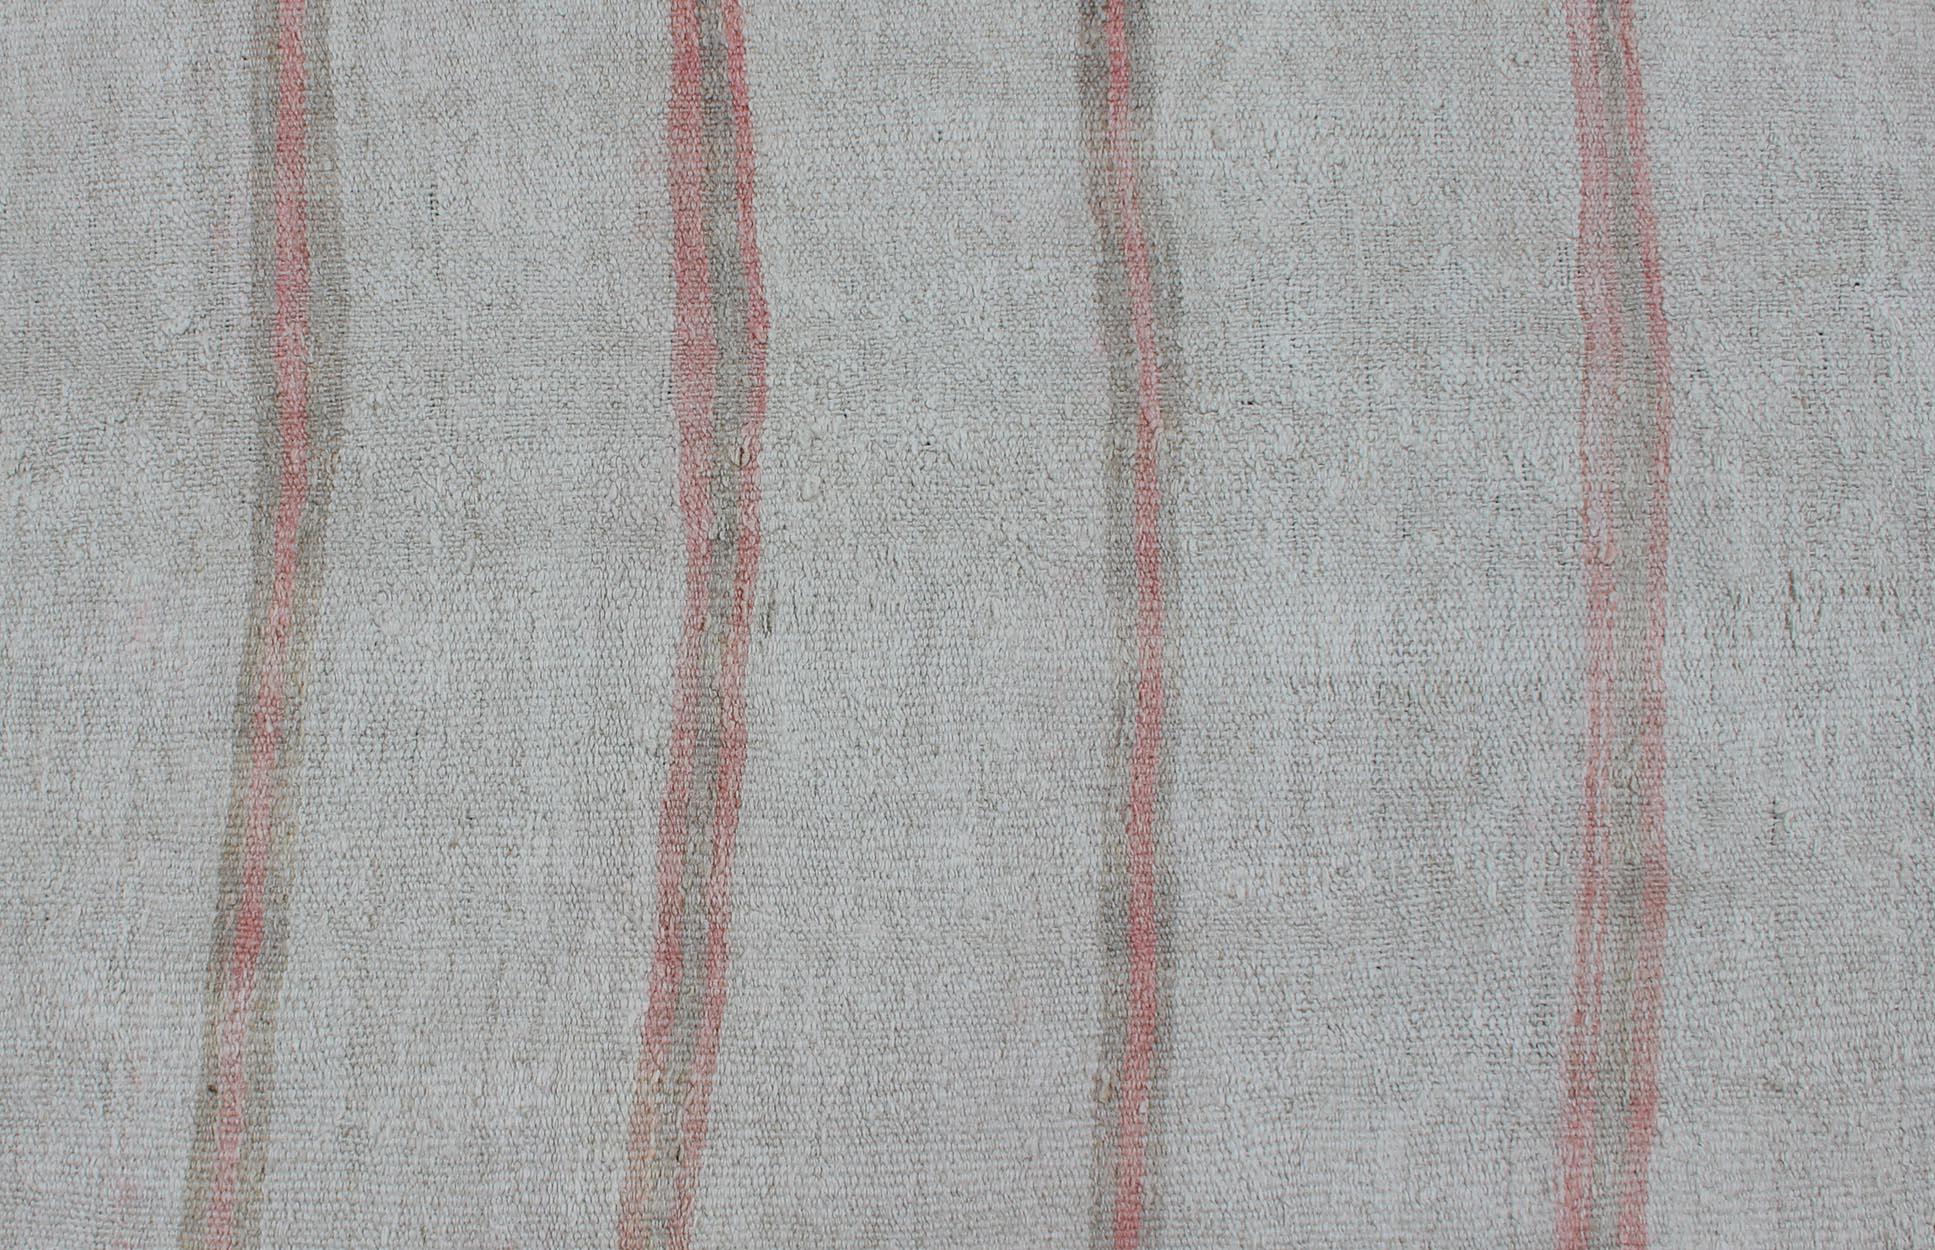 Wool Striped Turkish Vintage Kilim Flat-Weave Rug in Shades of Soft Red and Cream For Sale